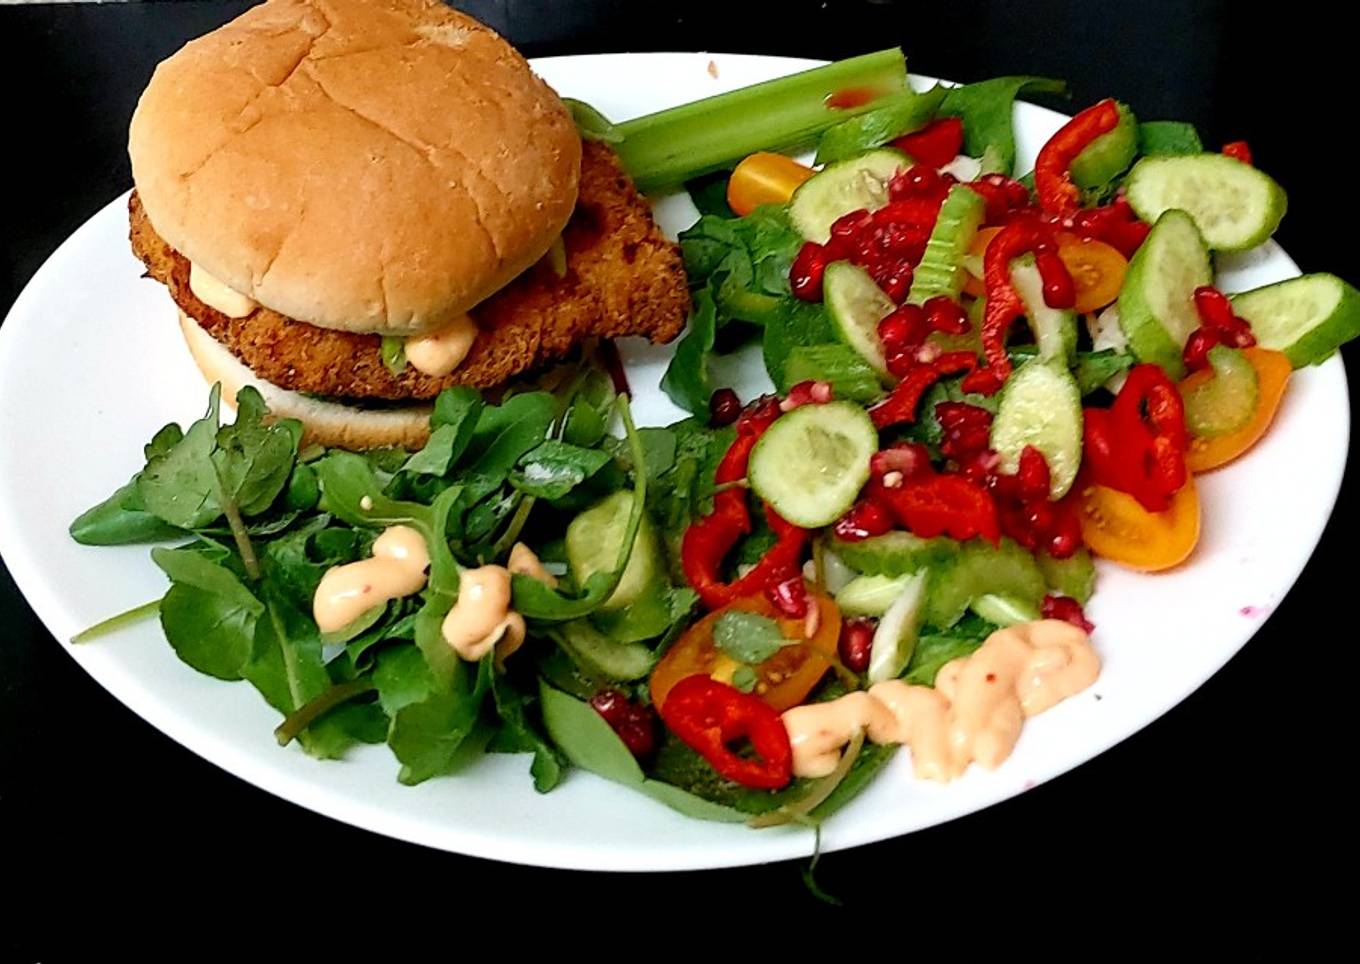 My Southern Fried Chicken Burger with a tasty Salad 😁